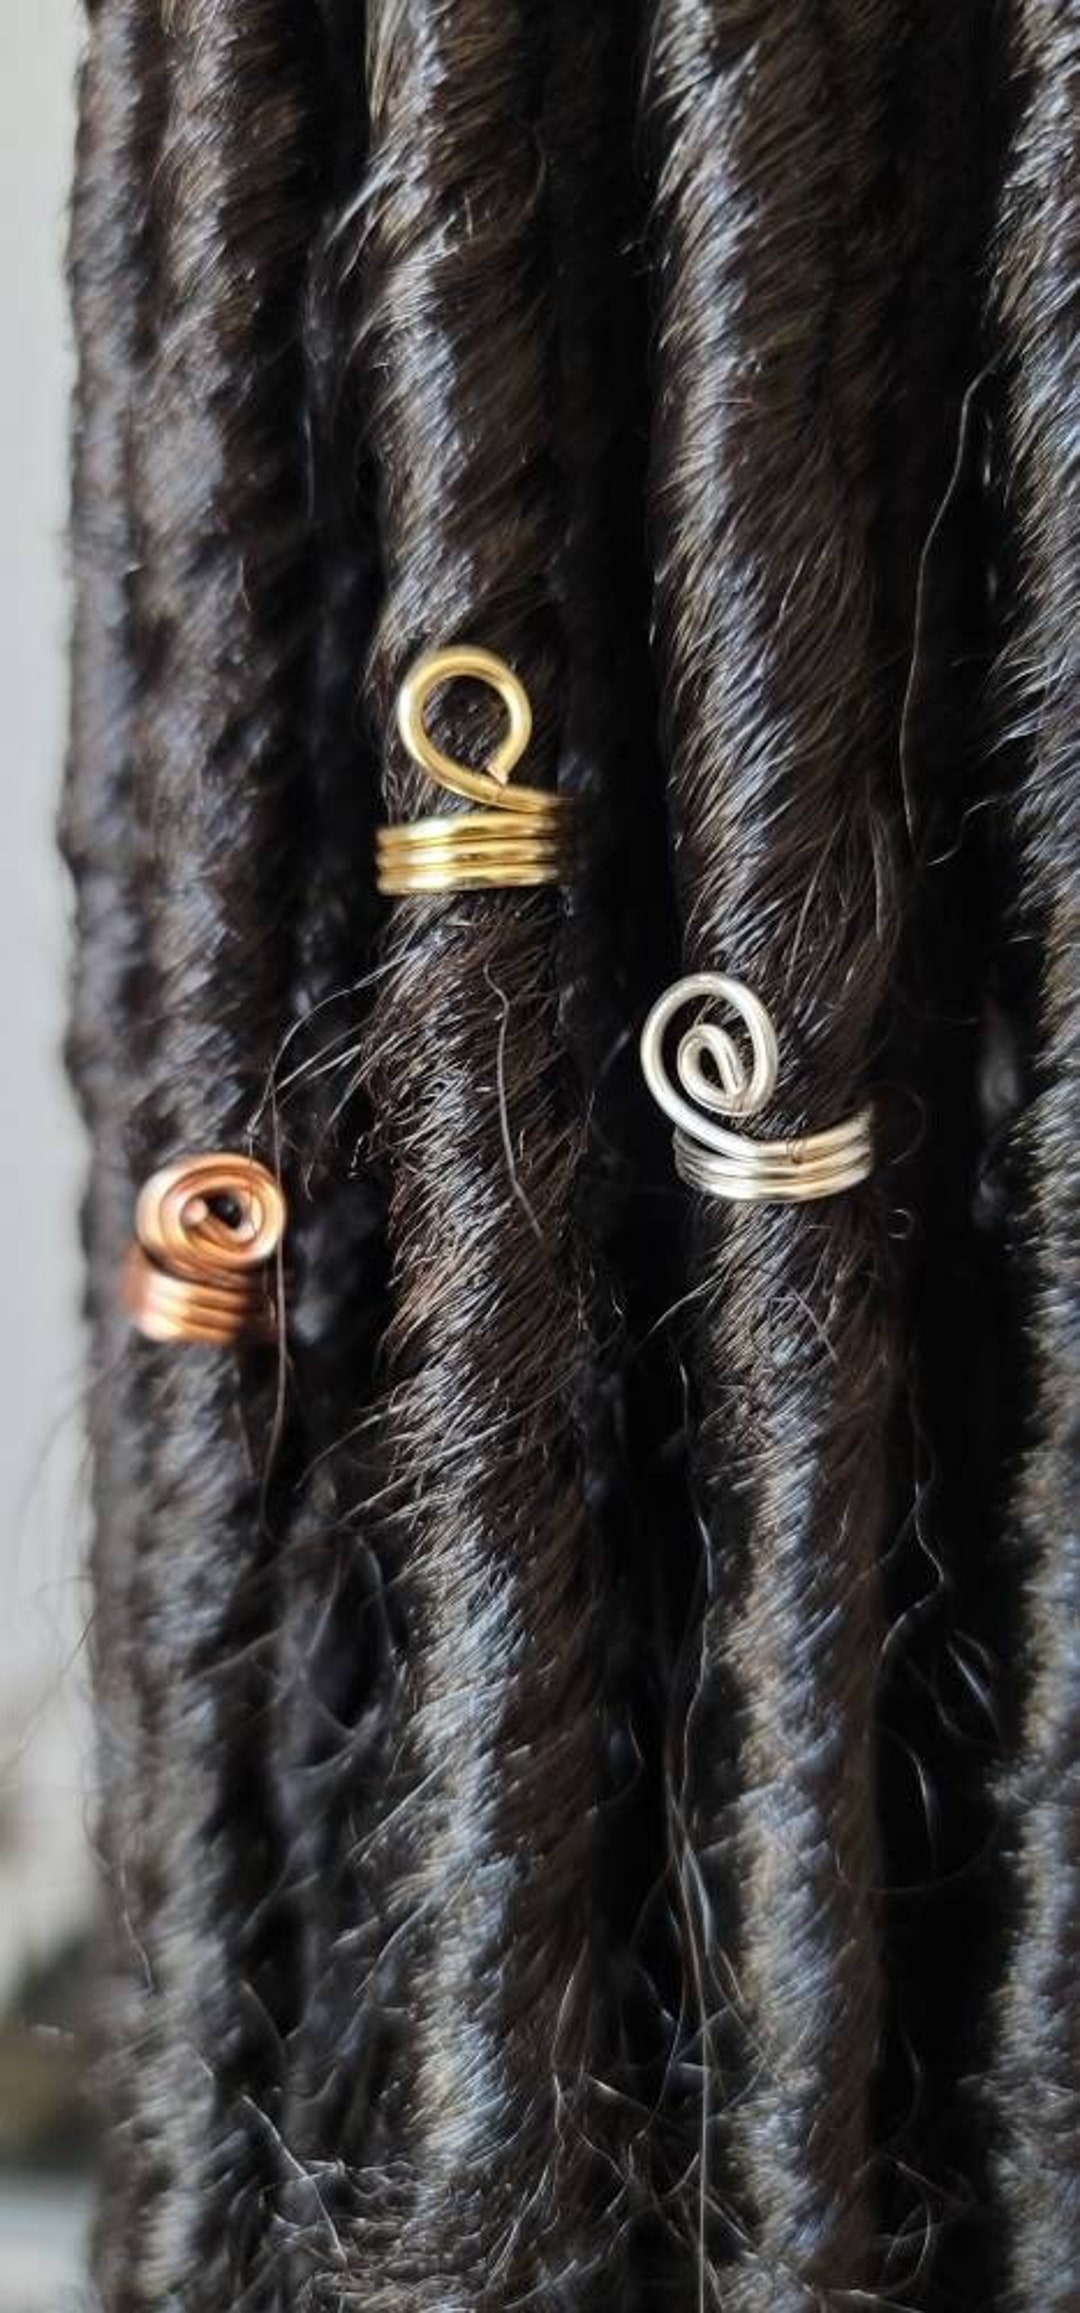 Crystal Butterfly Loc Jewelry, Gold Butterfly Copper Hair Beads, Dreadlock  Hair Accessories, Metal Beads for Braids, Dread Beads 